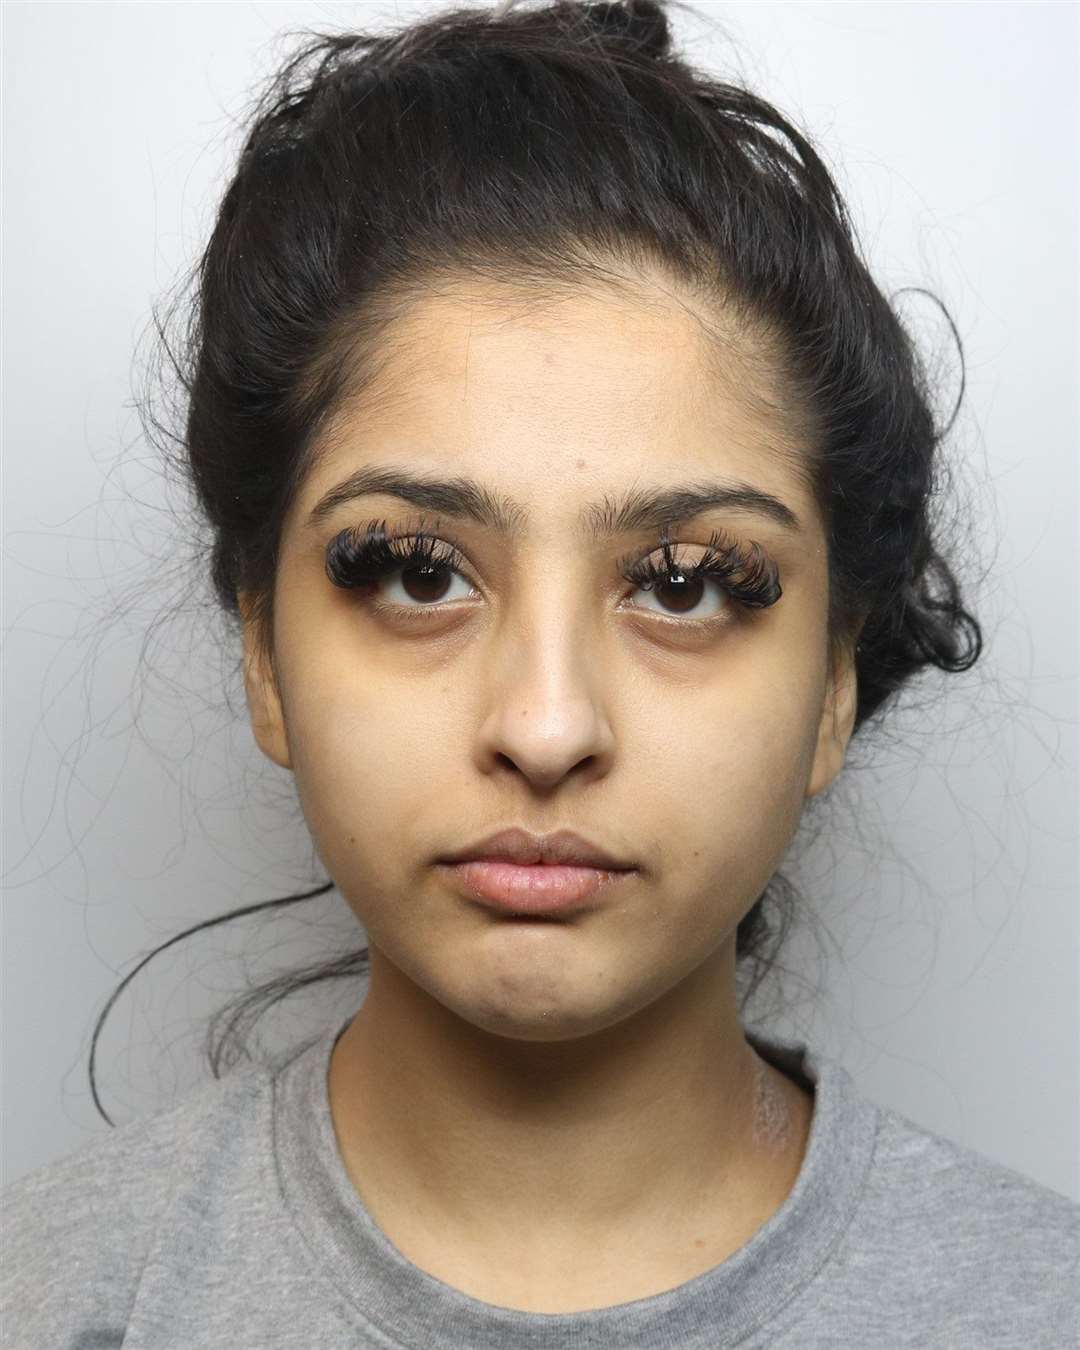 Mahek Bukhari sobbed in the dock as she was found guilty of two counts of murder on Friday (Leicestershire Police/PA)